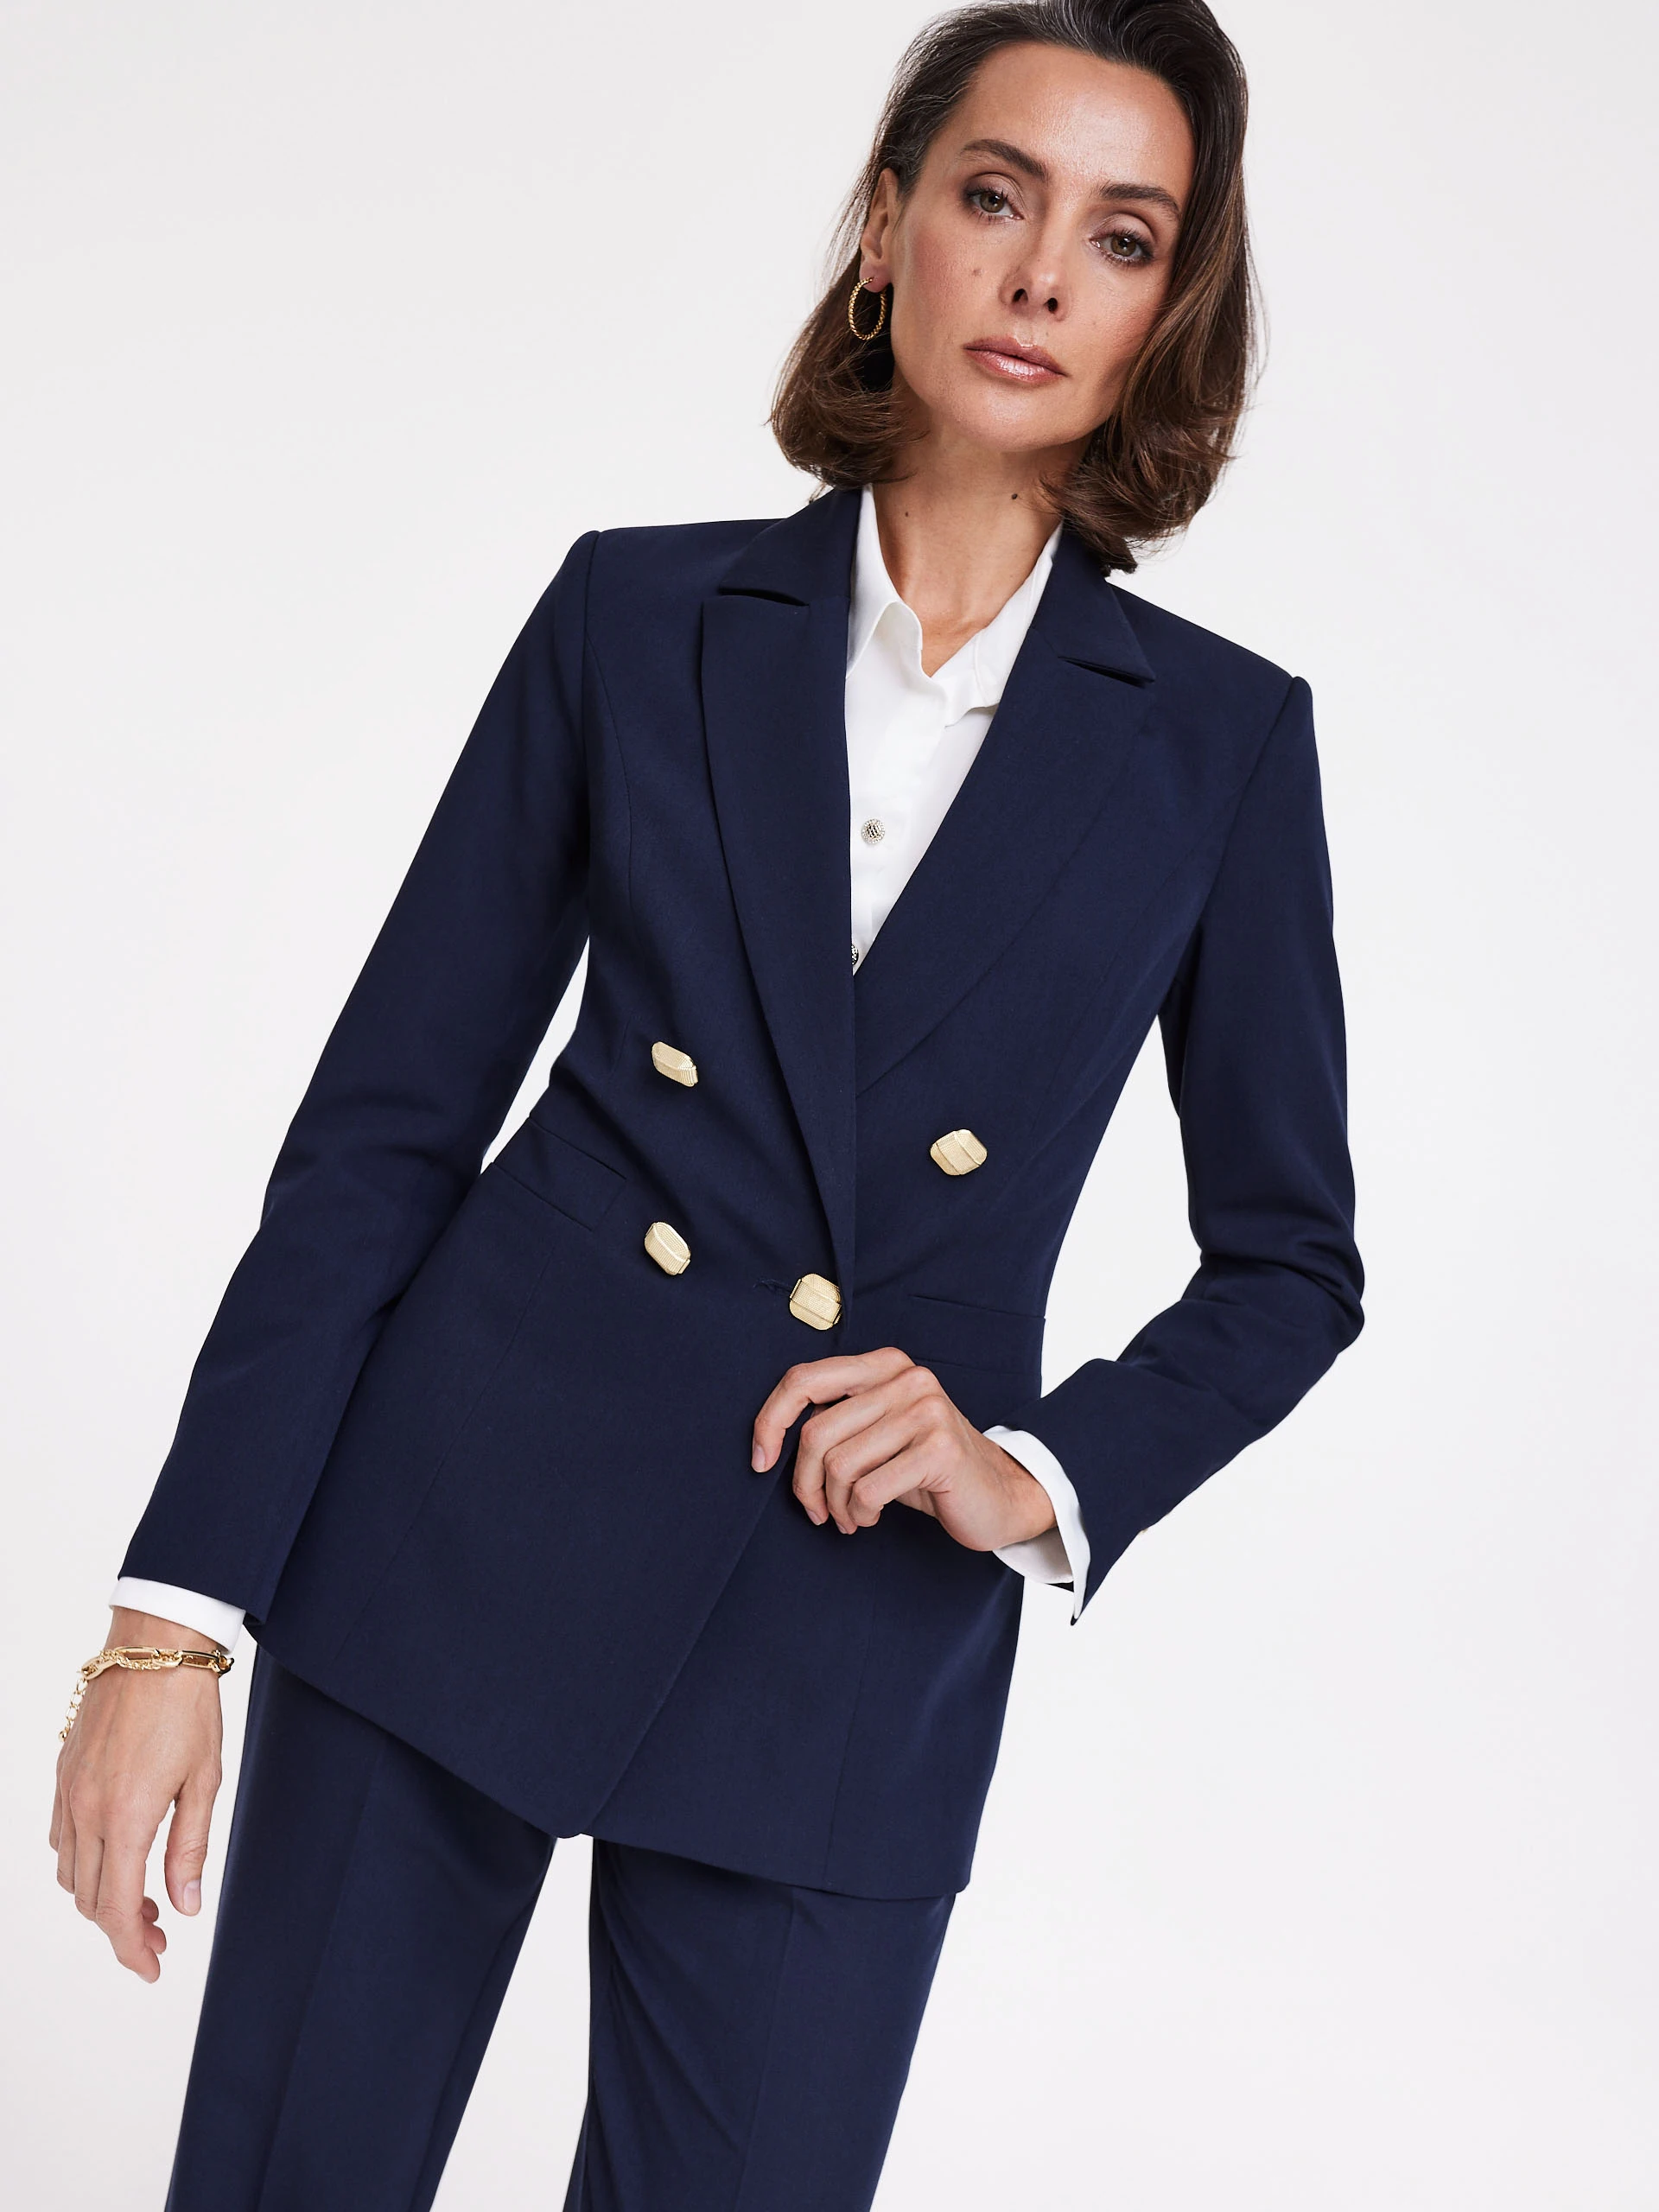 Navy blue jacket with gold buttons